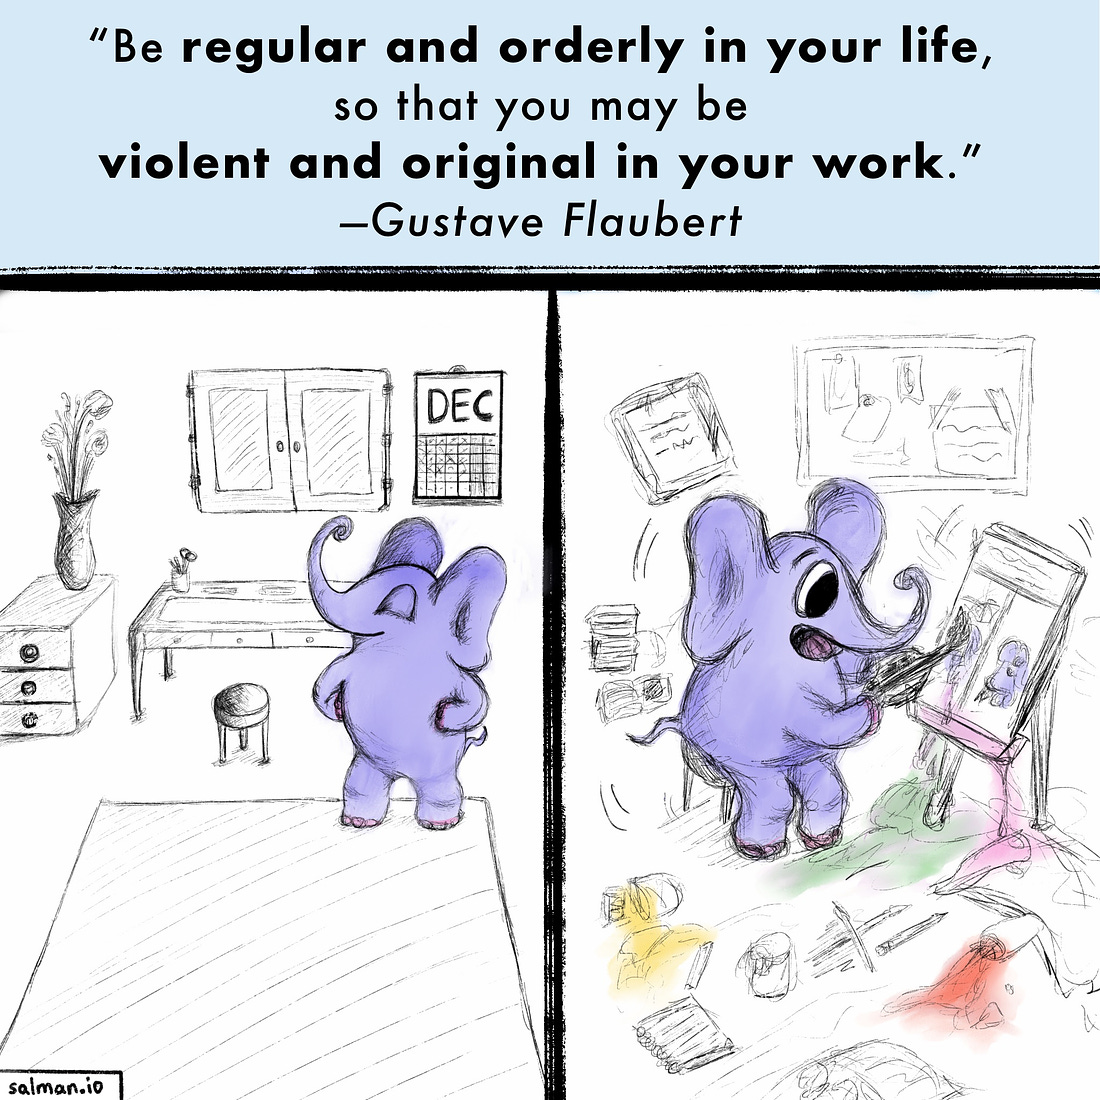 “Be regular and orderly in your life, so that you may be violent and original in your work.” —Gustave Flaubert